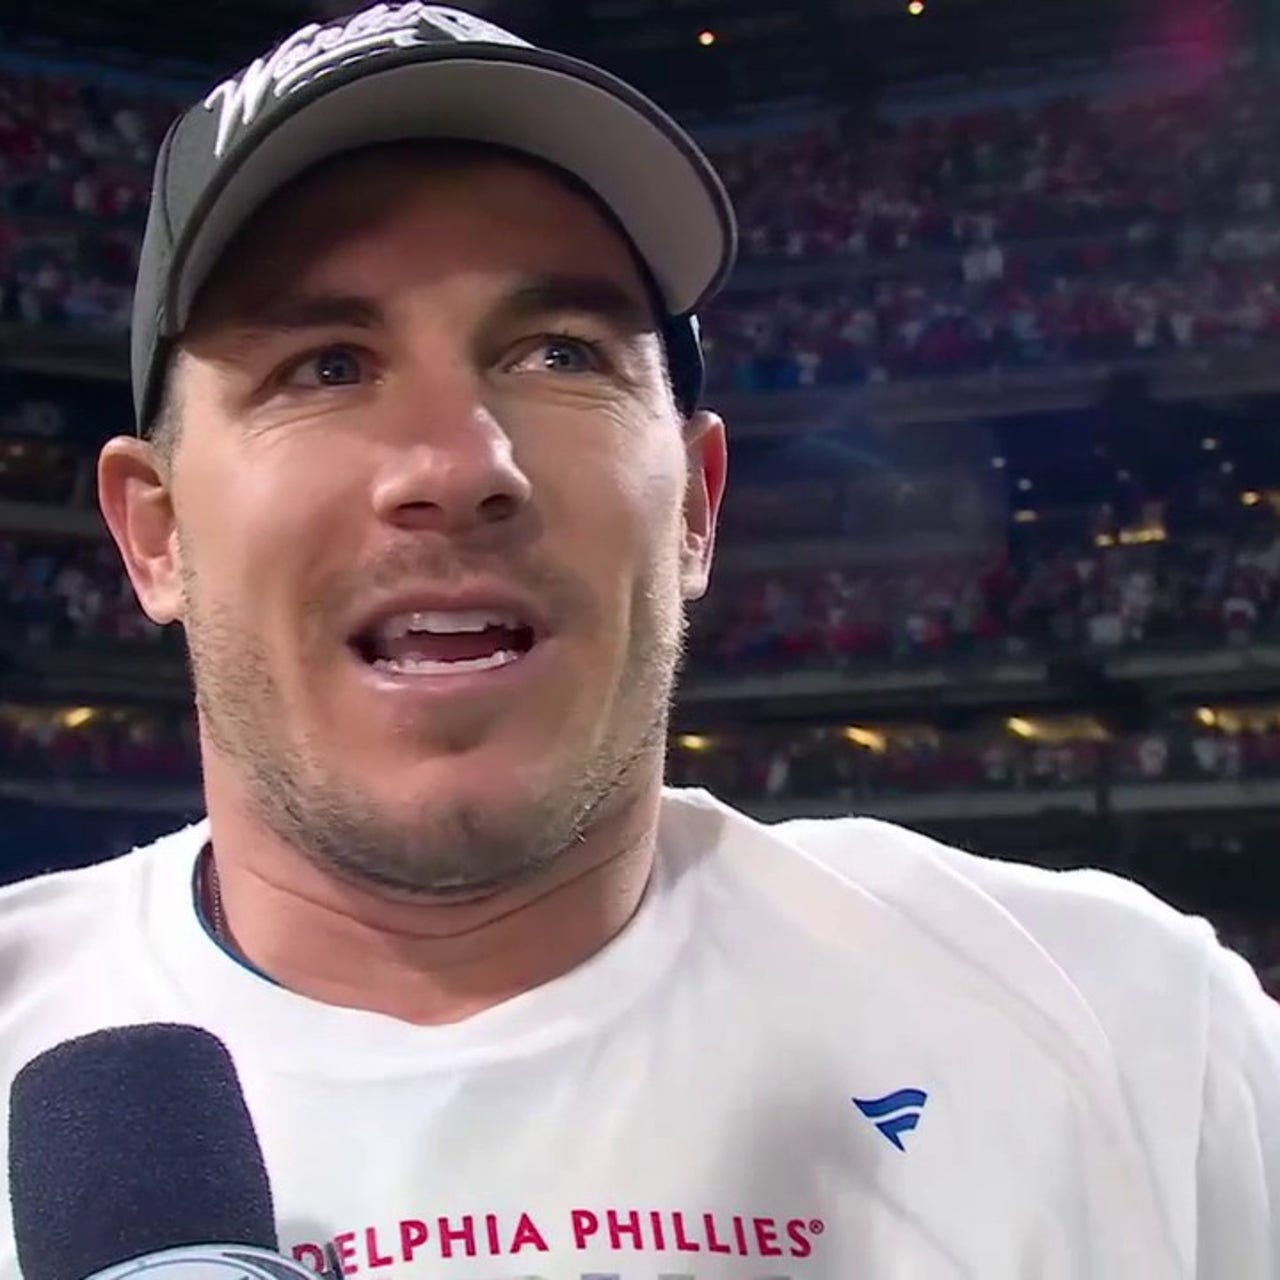 I can't believe I just did that' - Phillies' J.T. Realmuto on what